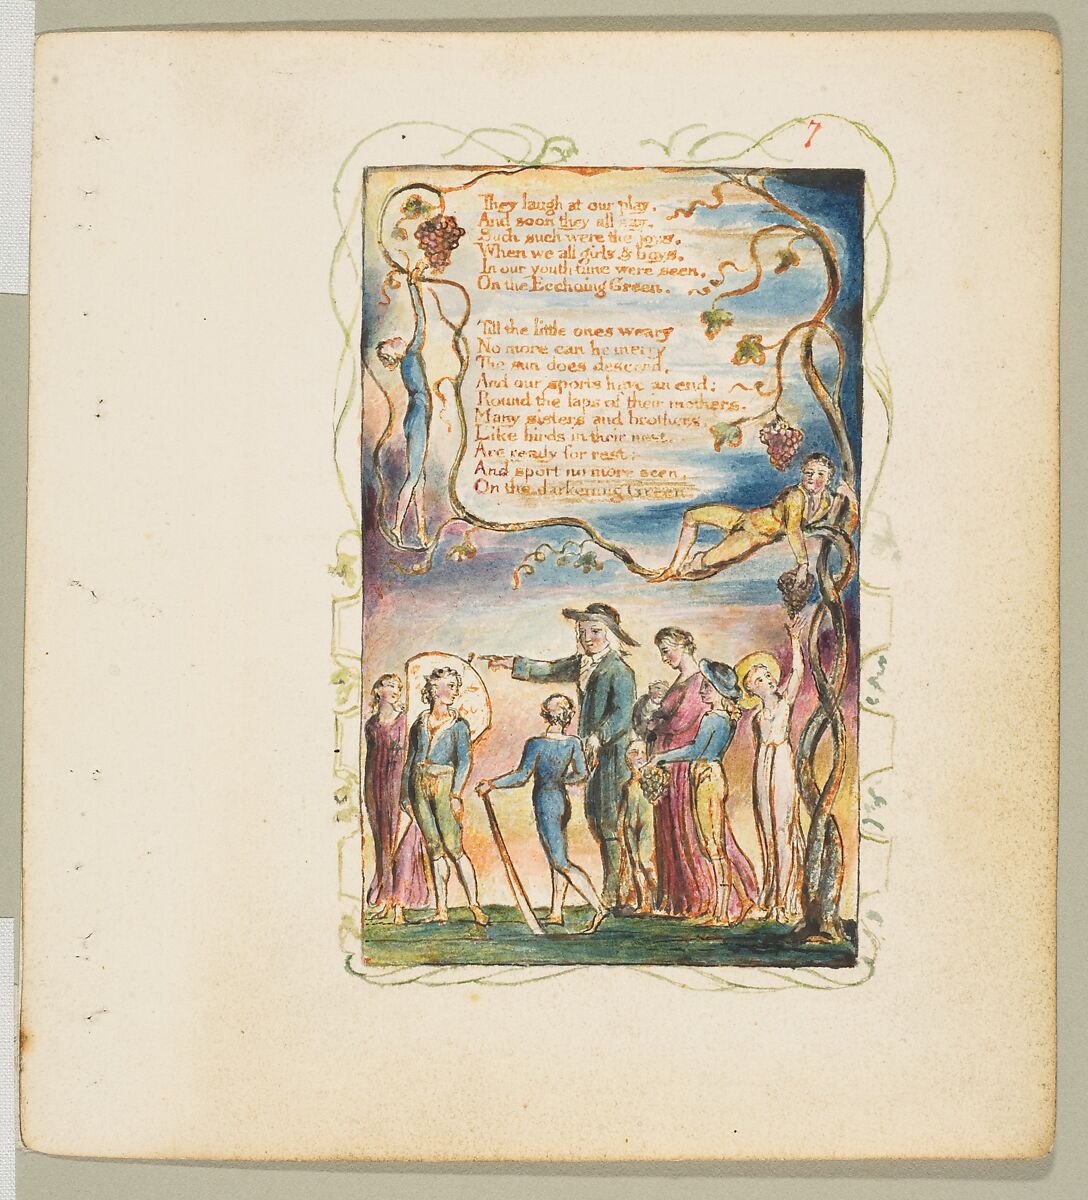 Songs of Innocence: The Ecchoing Green (second plate), William Blake  British, Relief etching printed in orange-brown ink and hand-colored with watercolor and shell gold